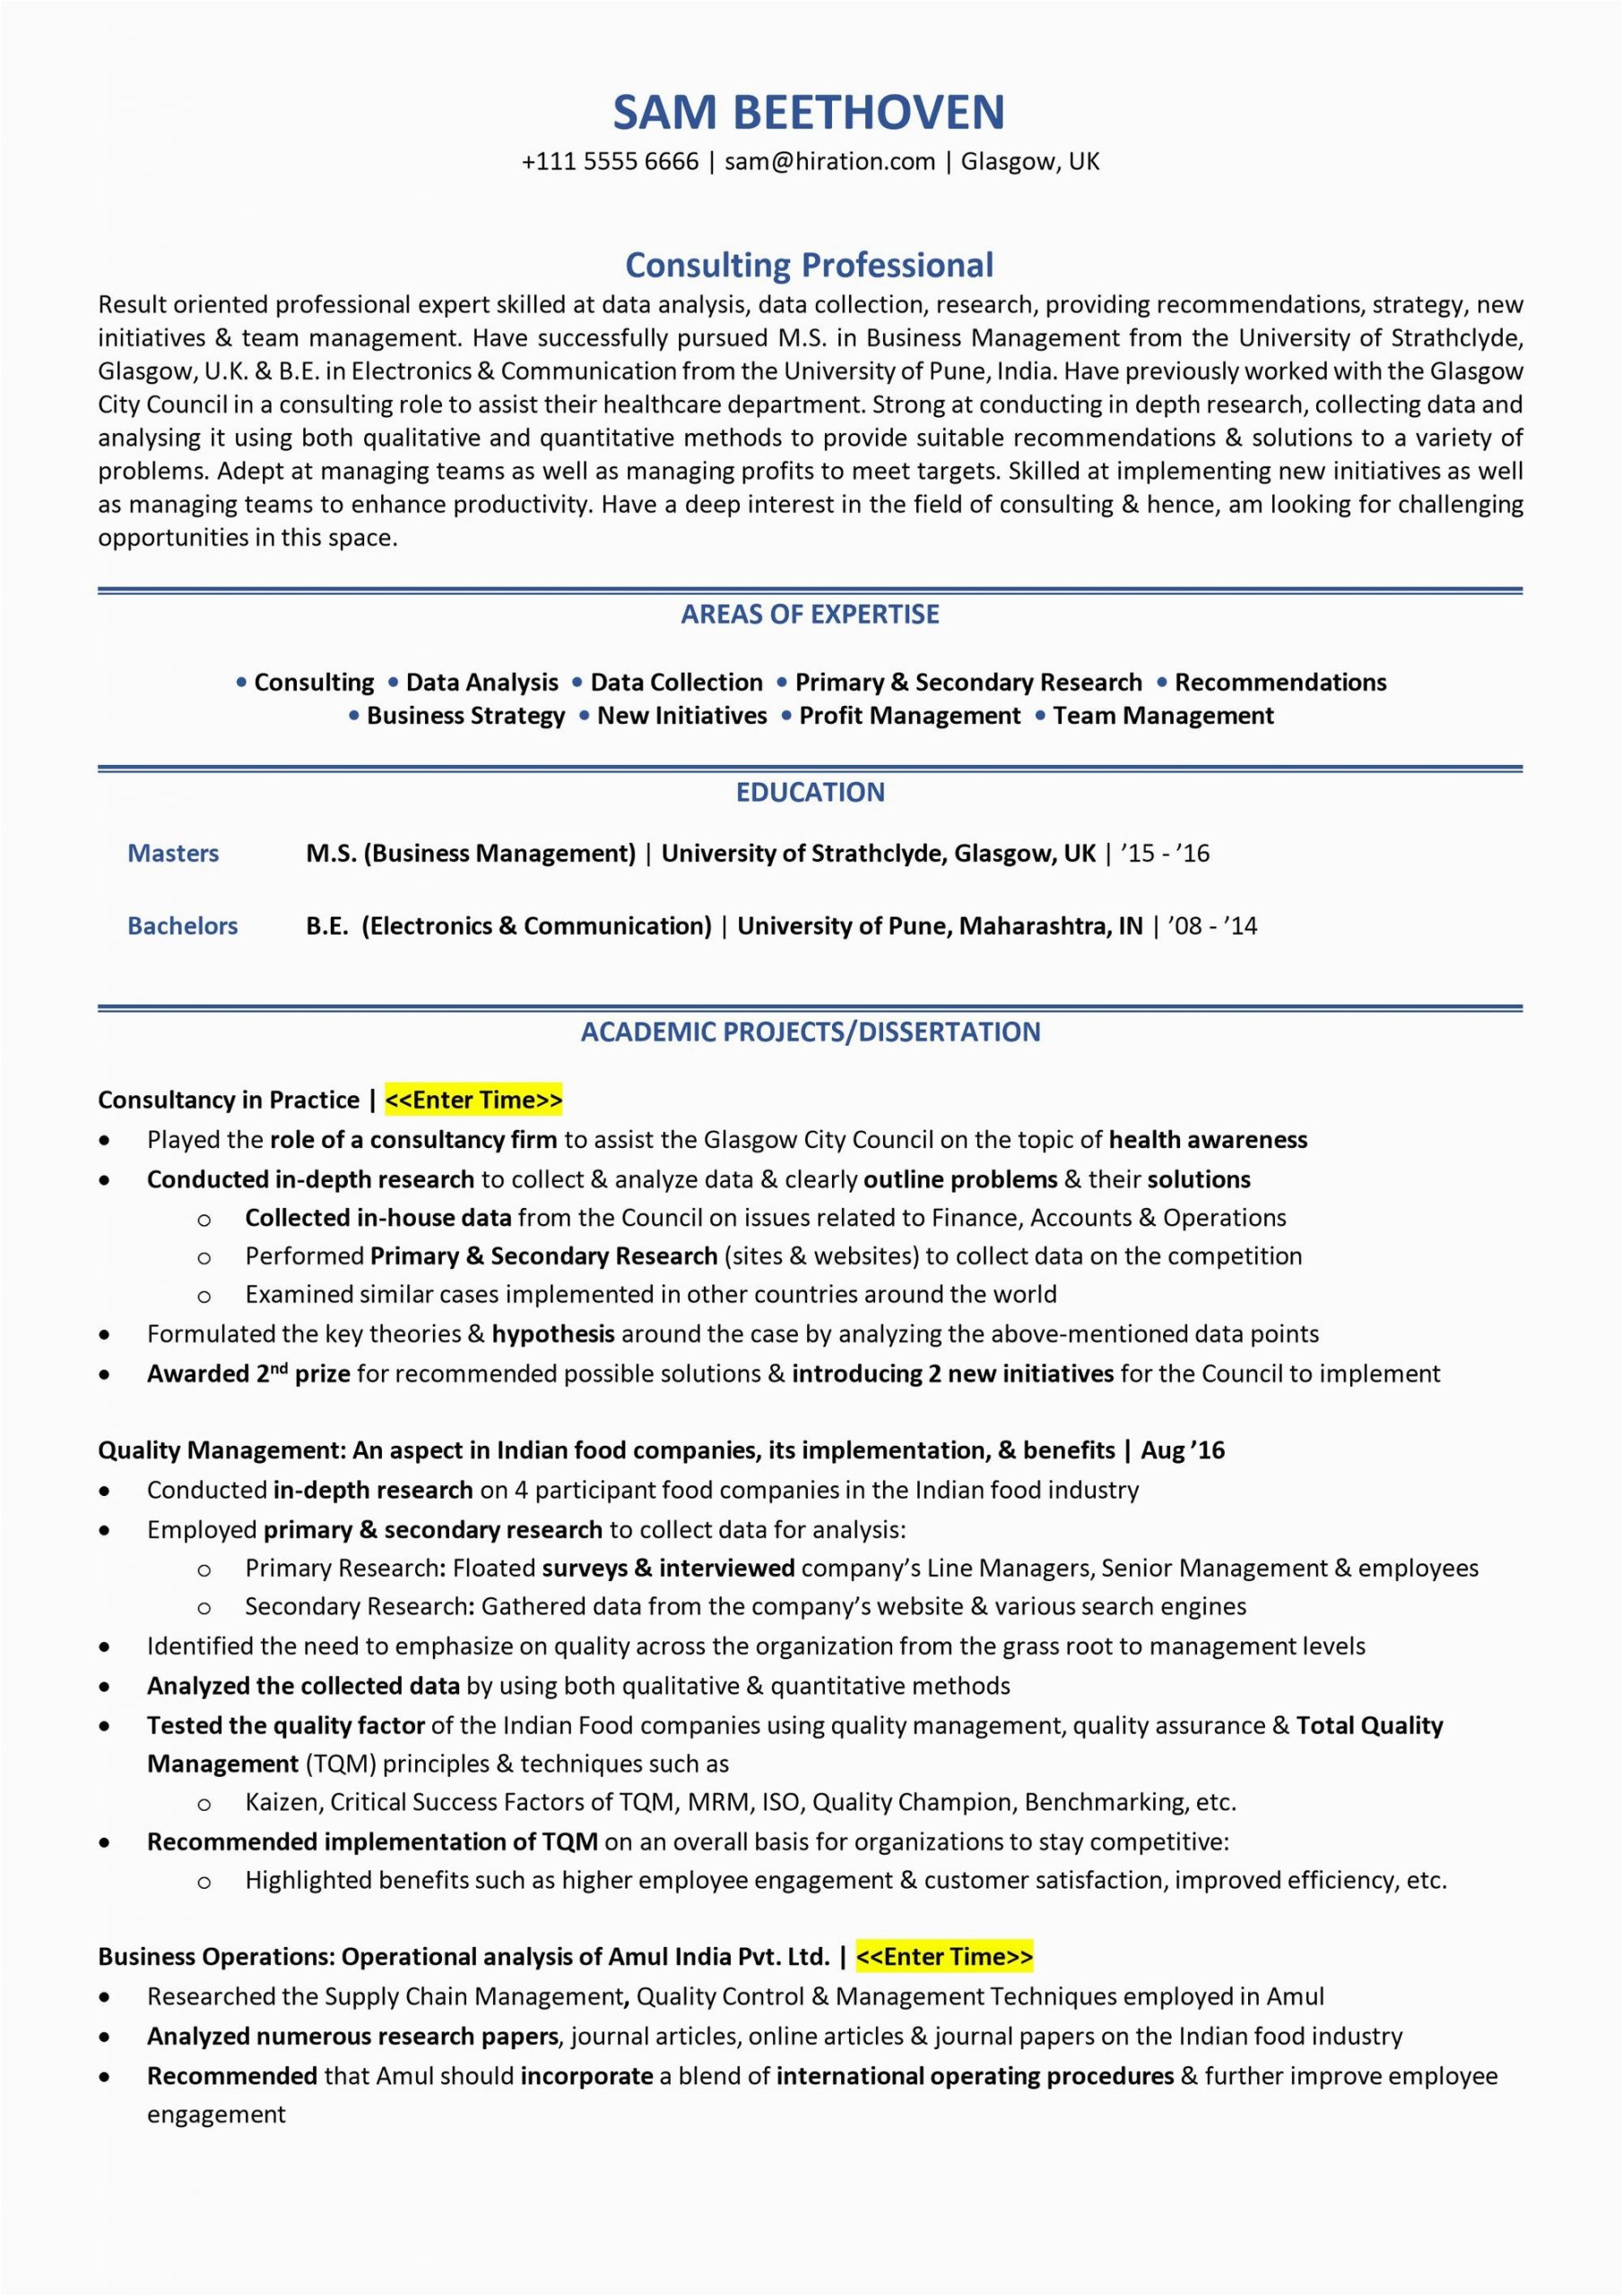 Sample Of Resume for It Students Student Resume [2019] Guide to College Student Resume